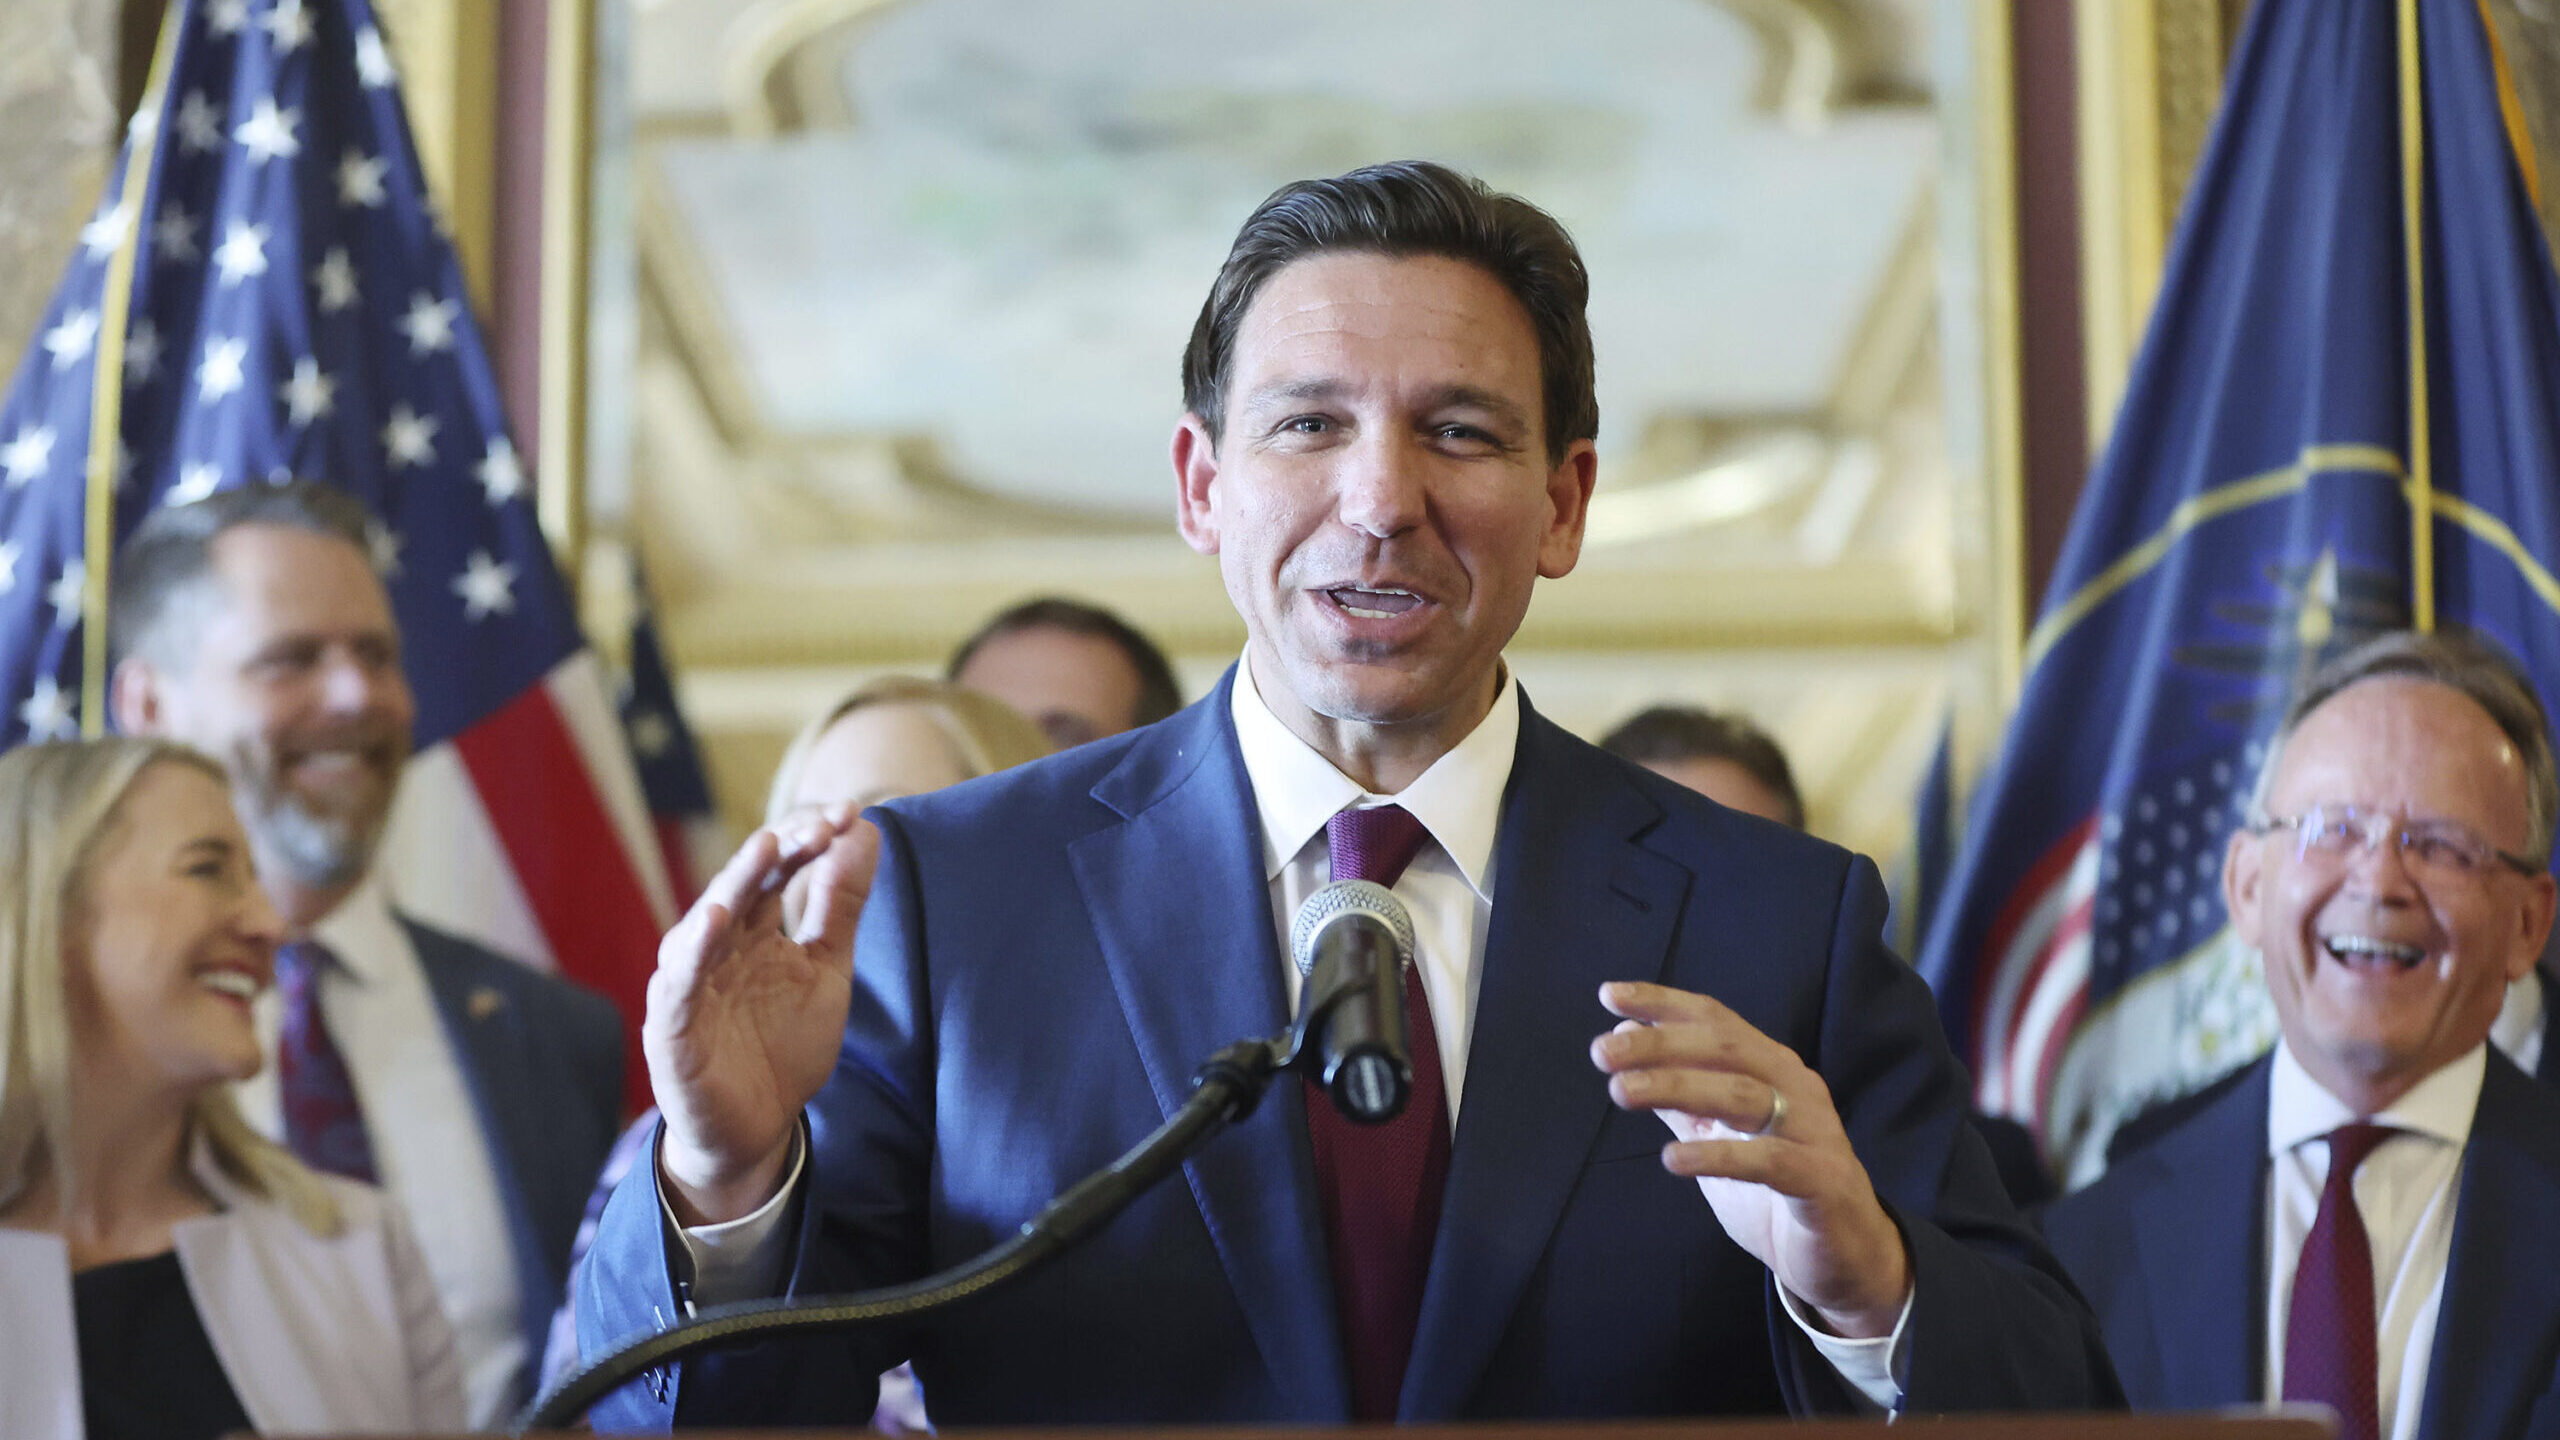 gov ron desantis speaks at a podium, utah lawmakers have responded to the governors stance on educa...